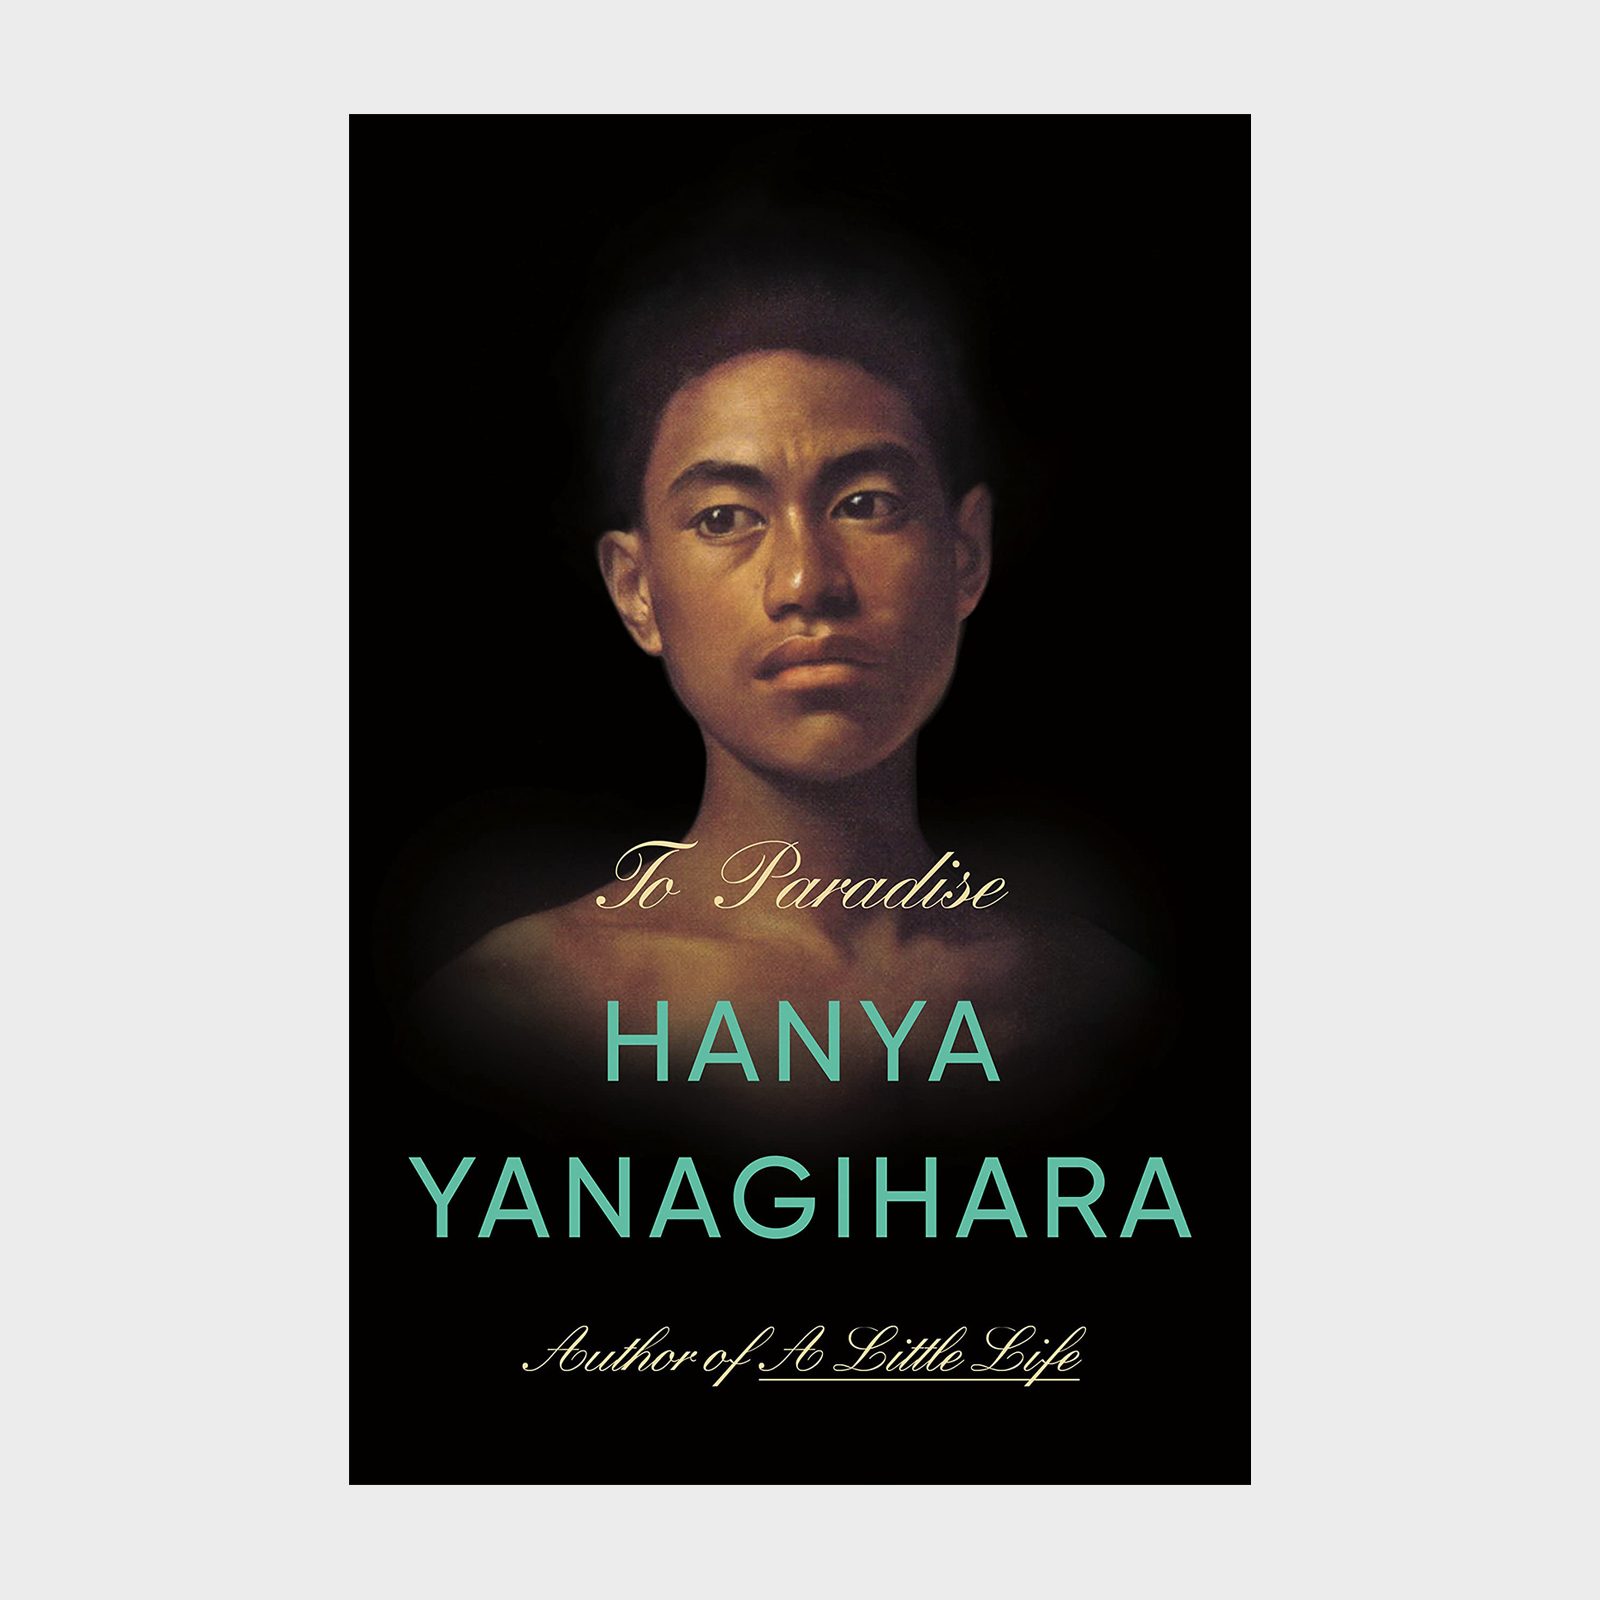 <p class=""><strong>Release date: </strong>Jan. 11, 2022</p> <p><a href="https://www.amazon.com/Paradise-Novel-Hanya-Yanagihara/dp/0385547935" rel="noopener noreferrer"><em>To Paradise</em></a> takes place in an alternate New York reality that can be seen as utopian or dystopian, depending on the person's position in society. Readers will meet characters in 1893, 1993 and 2093. From these disparate times and versions of America, characters survive crises like the AIDS epidemic and totalitarian rule as well as personal, intimate tragedies. Despite the varying plot lines, a common thread pulls every scene together: the question of what makes us human and what makes us love.</p> <p class="listicle-page__cta-button-shop"><a class="shop-btn" href="https://www.amazon.com/Paradise-Novel-Hanya-Yanagihara/dp/0385547935">Shop Now</a></p>